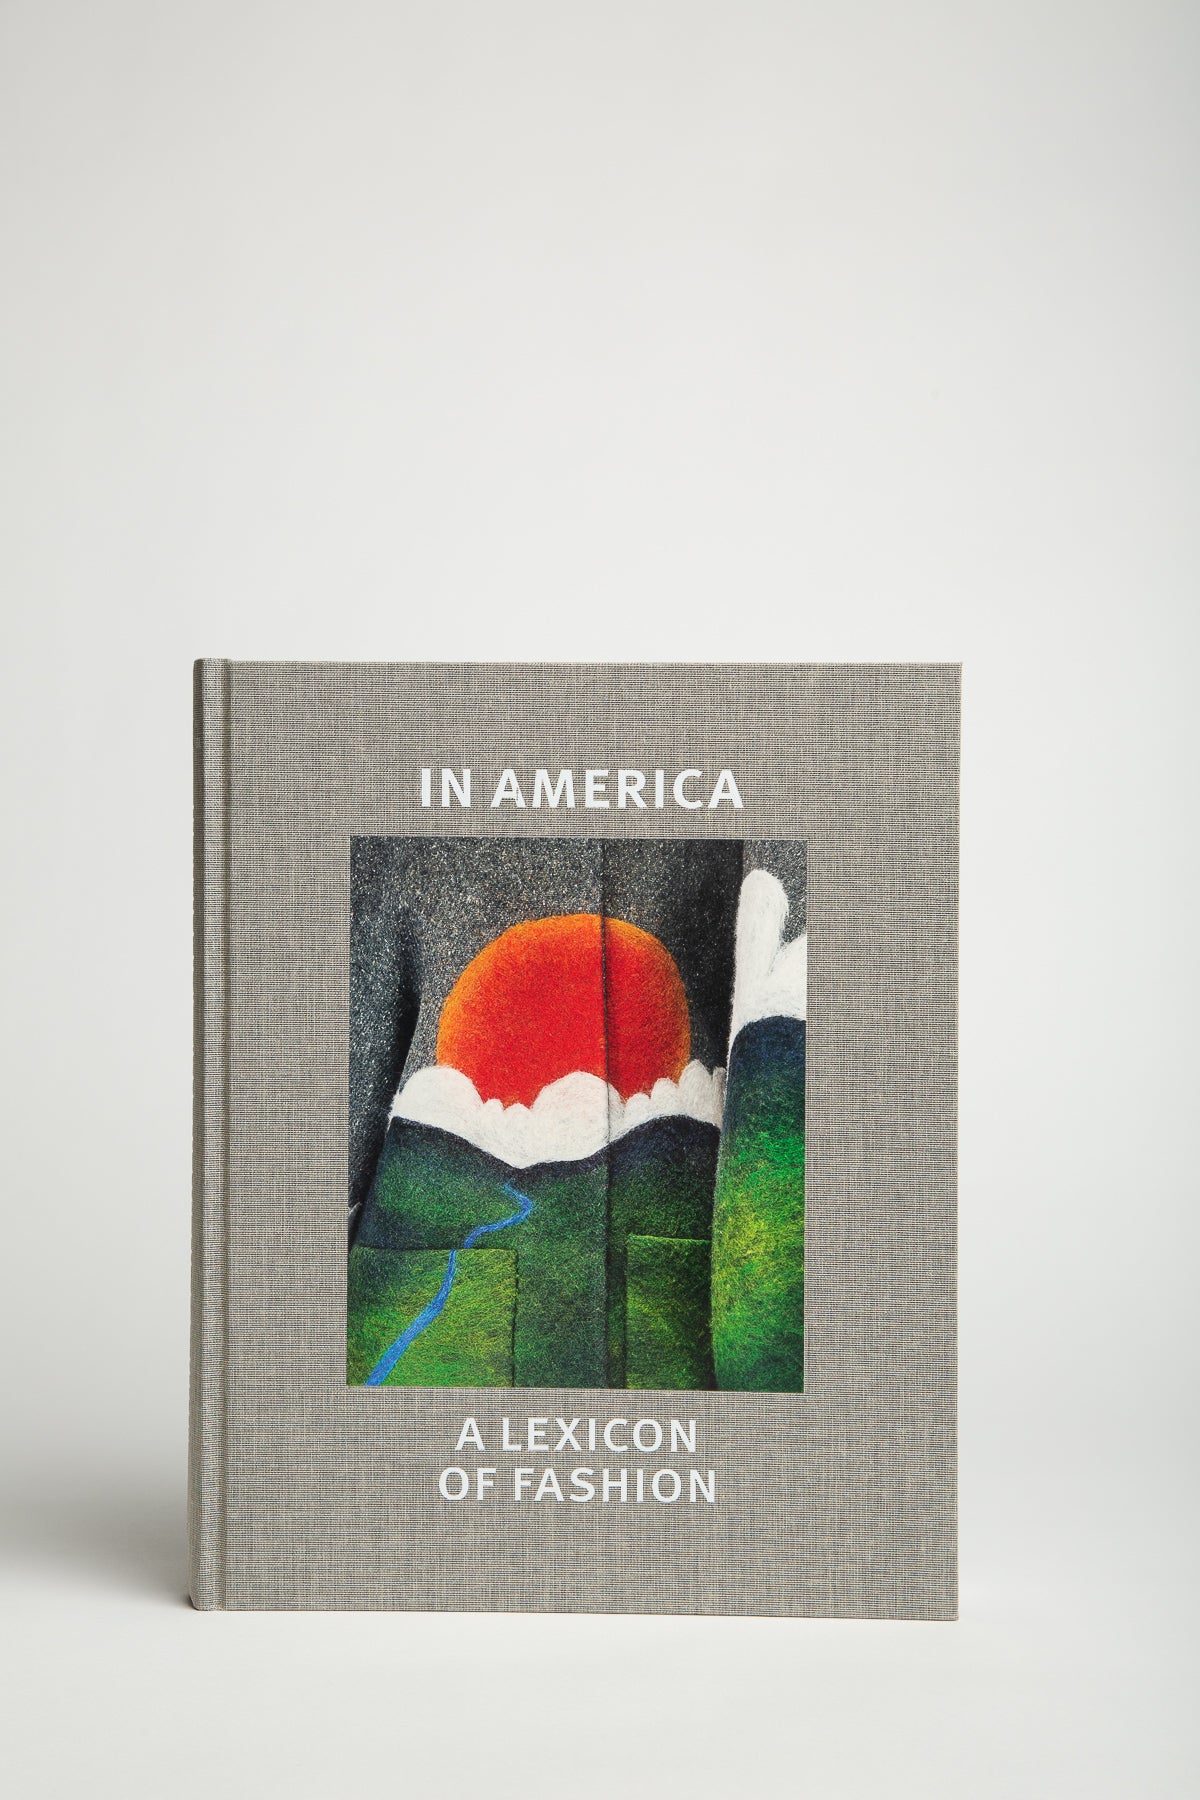 YALE | IN AMERICA: A LEXICON OF FASHION